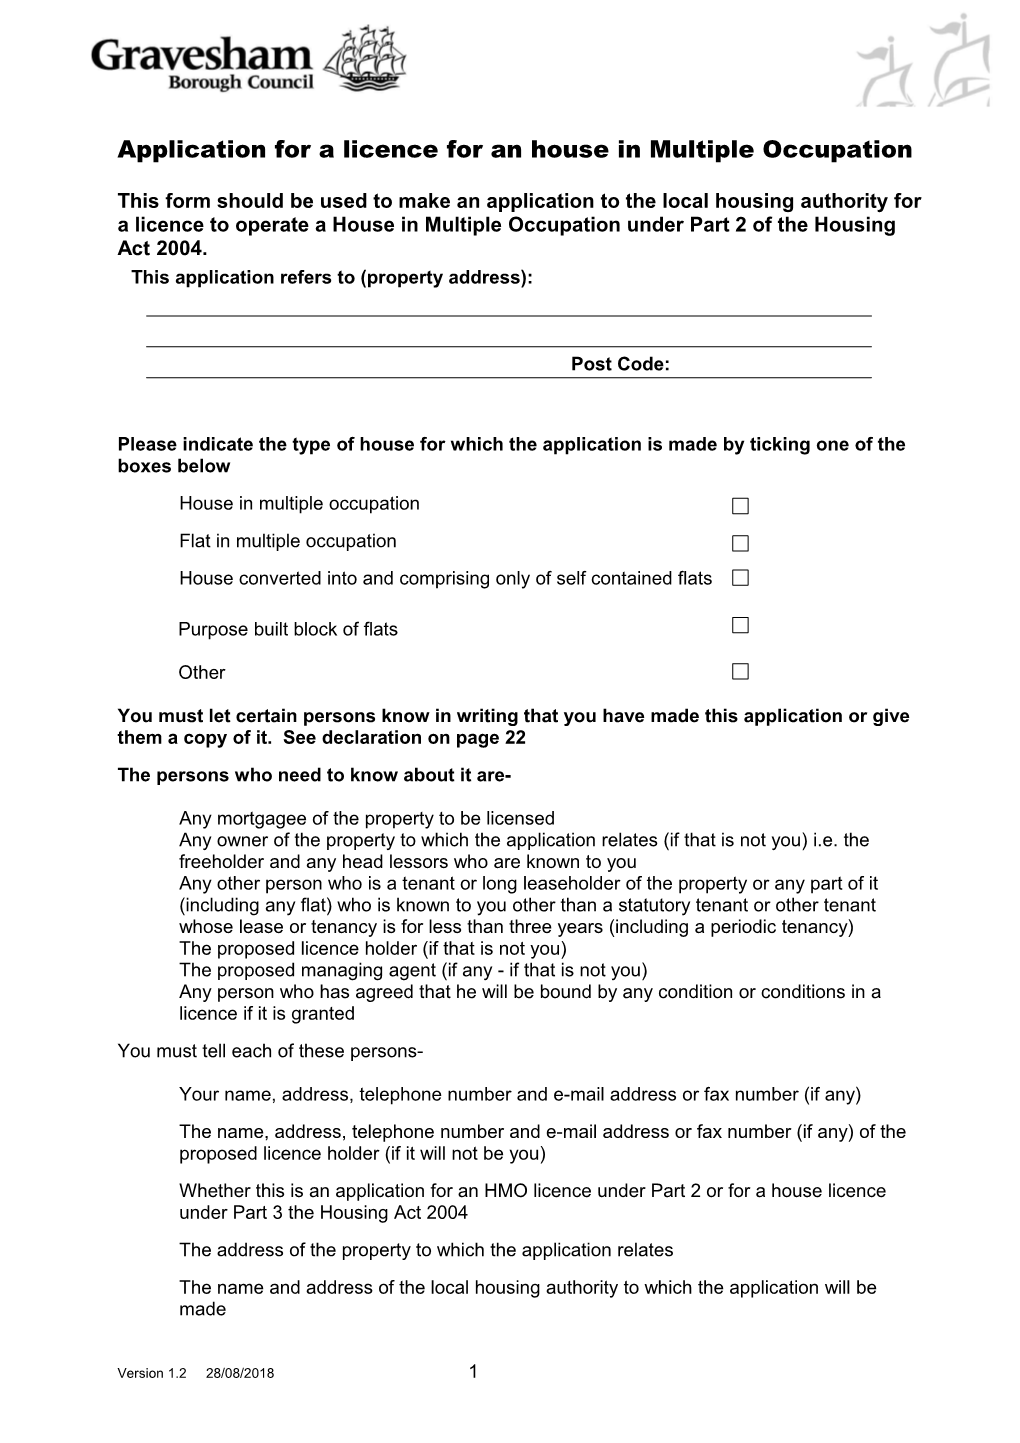 Guidance for Filling in Forms